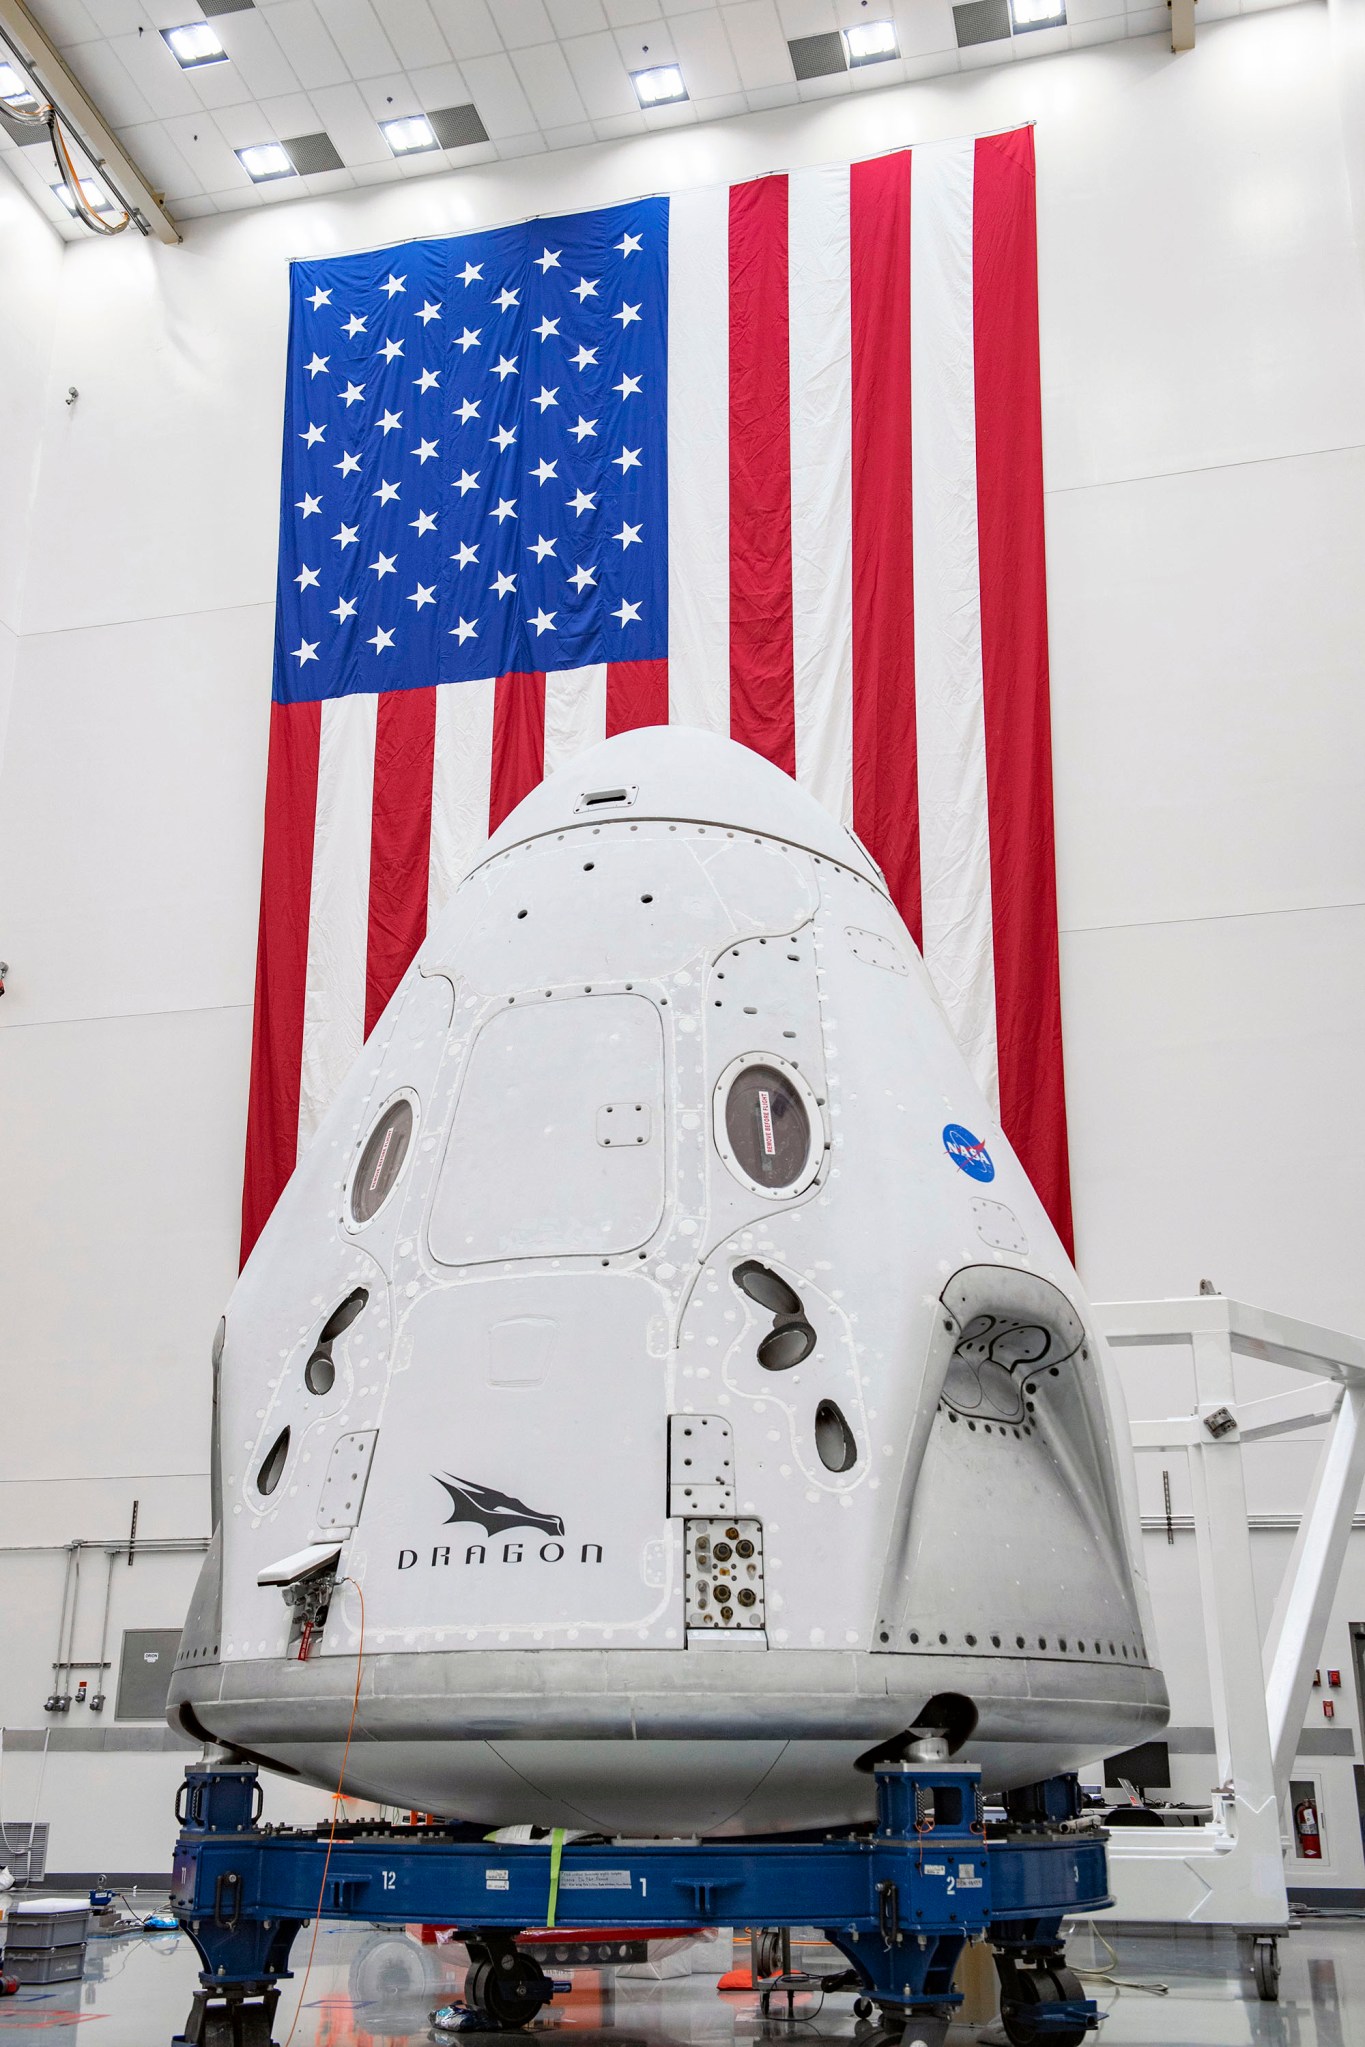 The SpaceX Crew Dragon spacecraft undergoes final processing at Cape Canaveral Air Force Station, Florida, in preparation for the Demo-2 launch with NASA astronauts Bob Behnken and Doug Hurley to the International Space Station for NASA’s Commercial Crew Program.